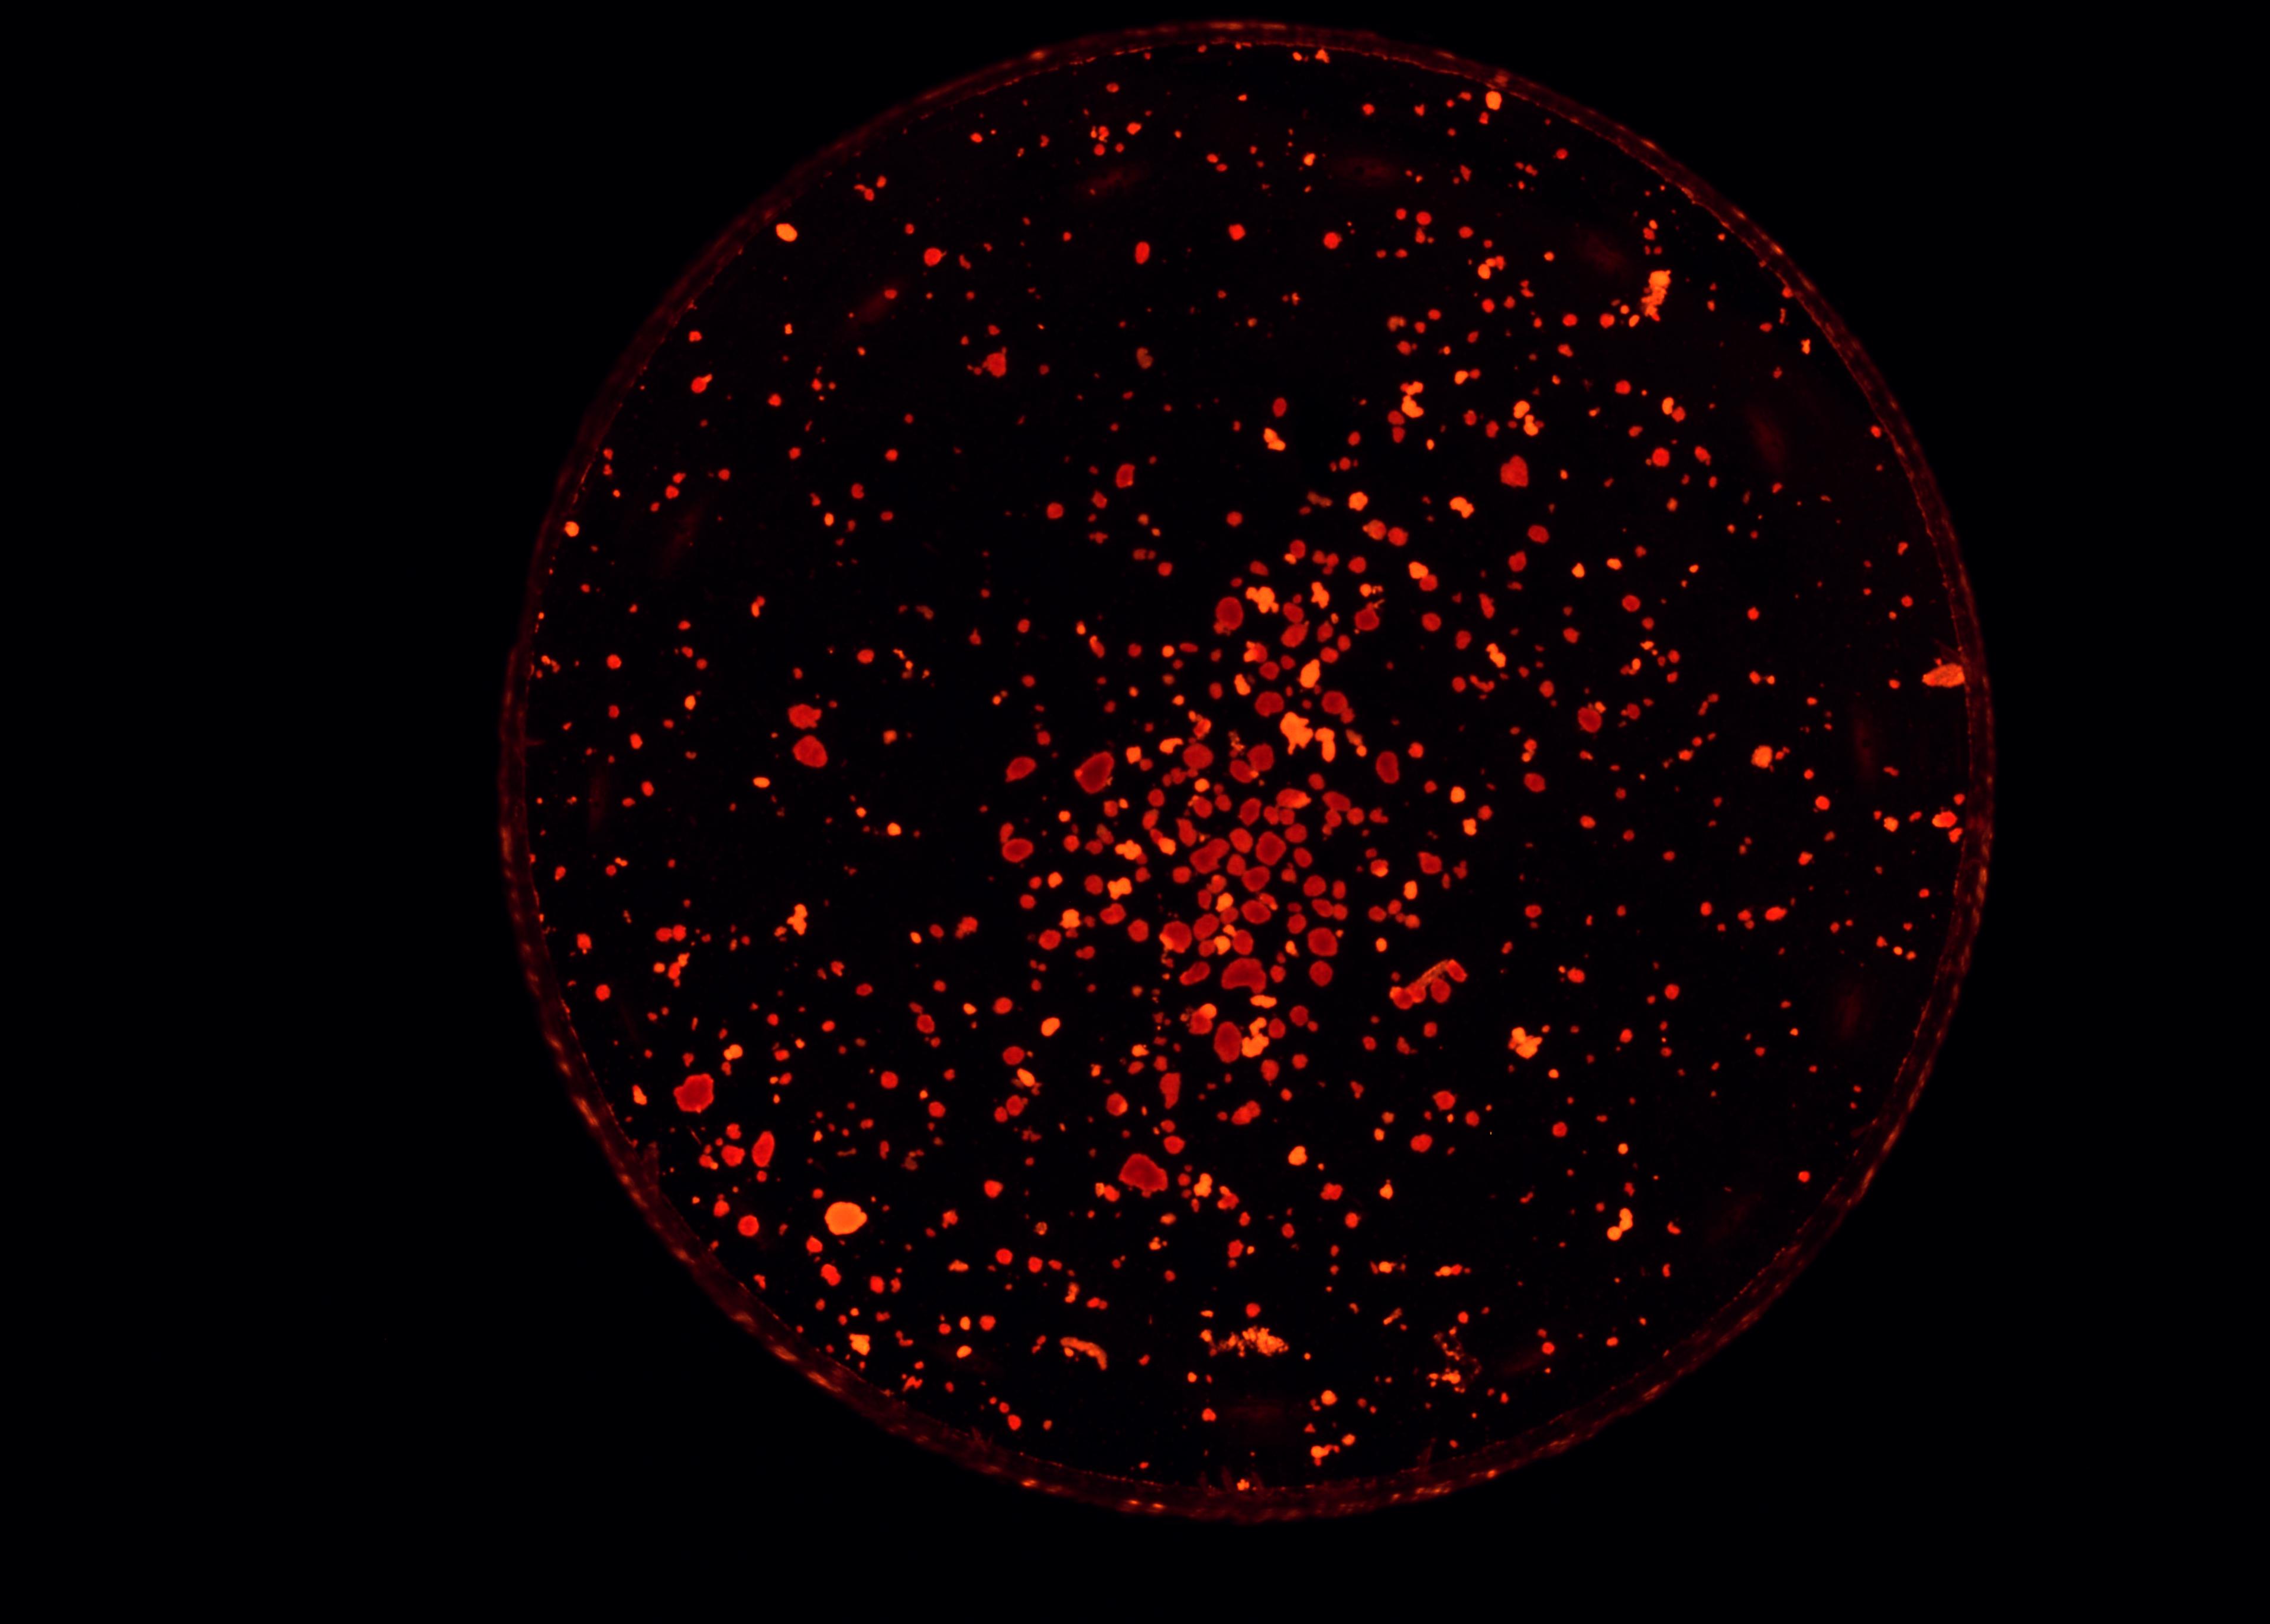  Isolated human islets on Day 12 of culture stained with diphenylthiocarbazone (DZT)